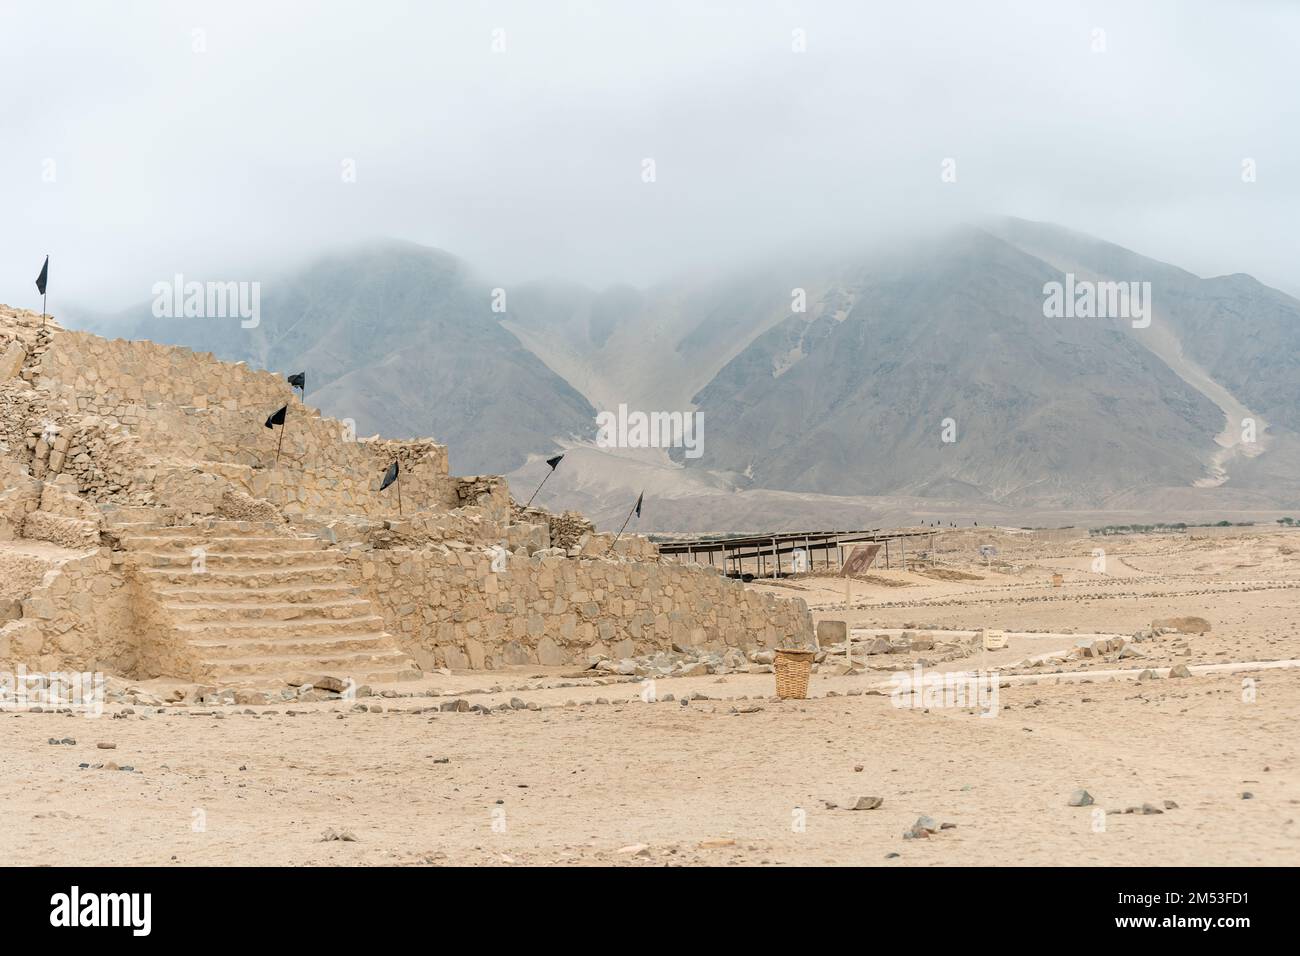 archaeological site of the Caral civilization in Peru in the Supe valley, declared a Humanity Cultural Heritage site by UNESCO Stock Photo